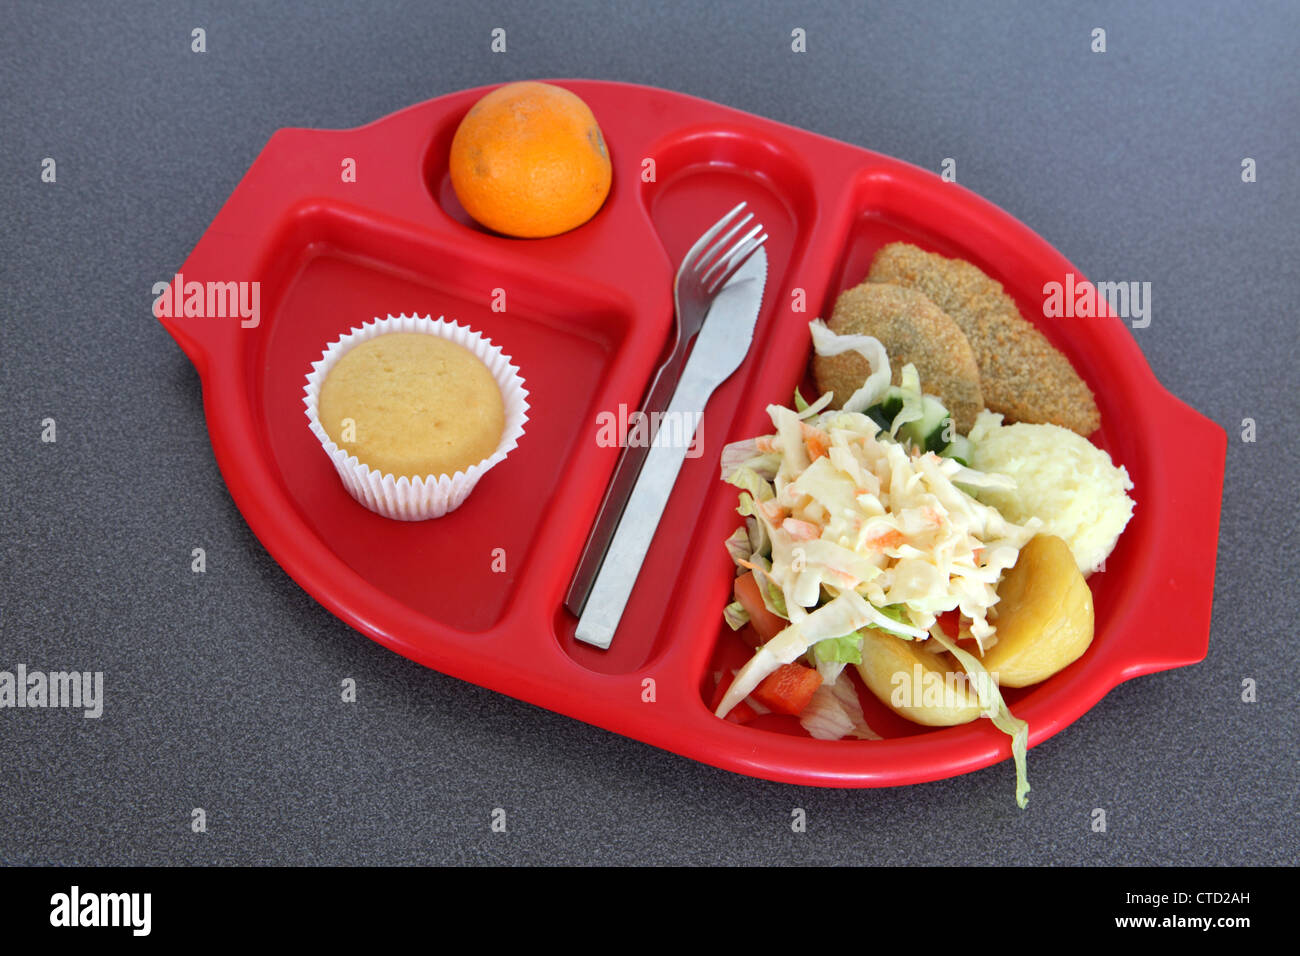 Healthy school lunch dinner served on preformed red plastic tray, salad  bean burger, muffin, orange Stock Photo - Alamy